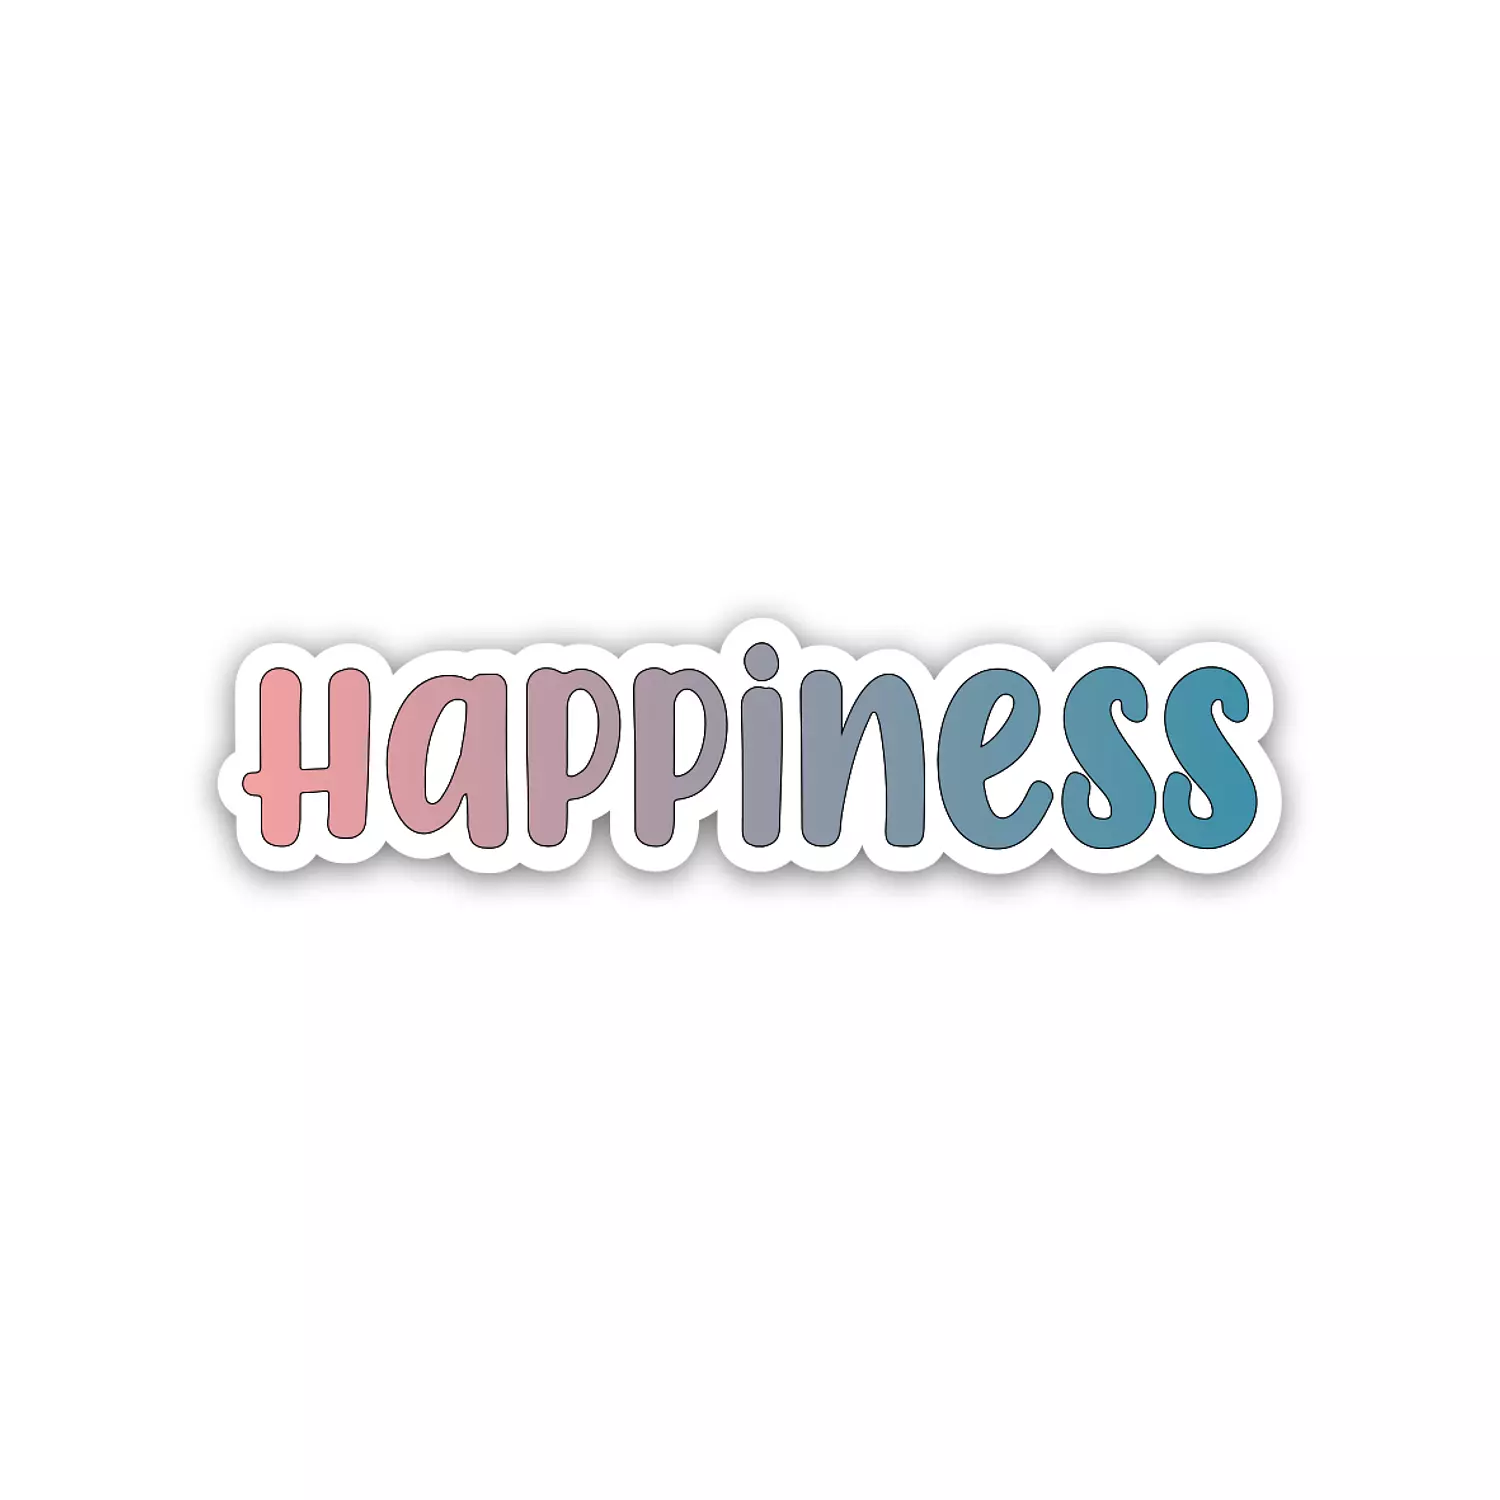 Happiness - Positive Quotes  hover image